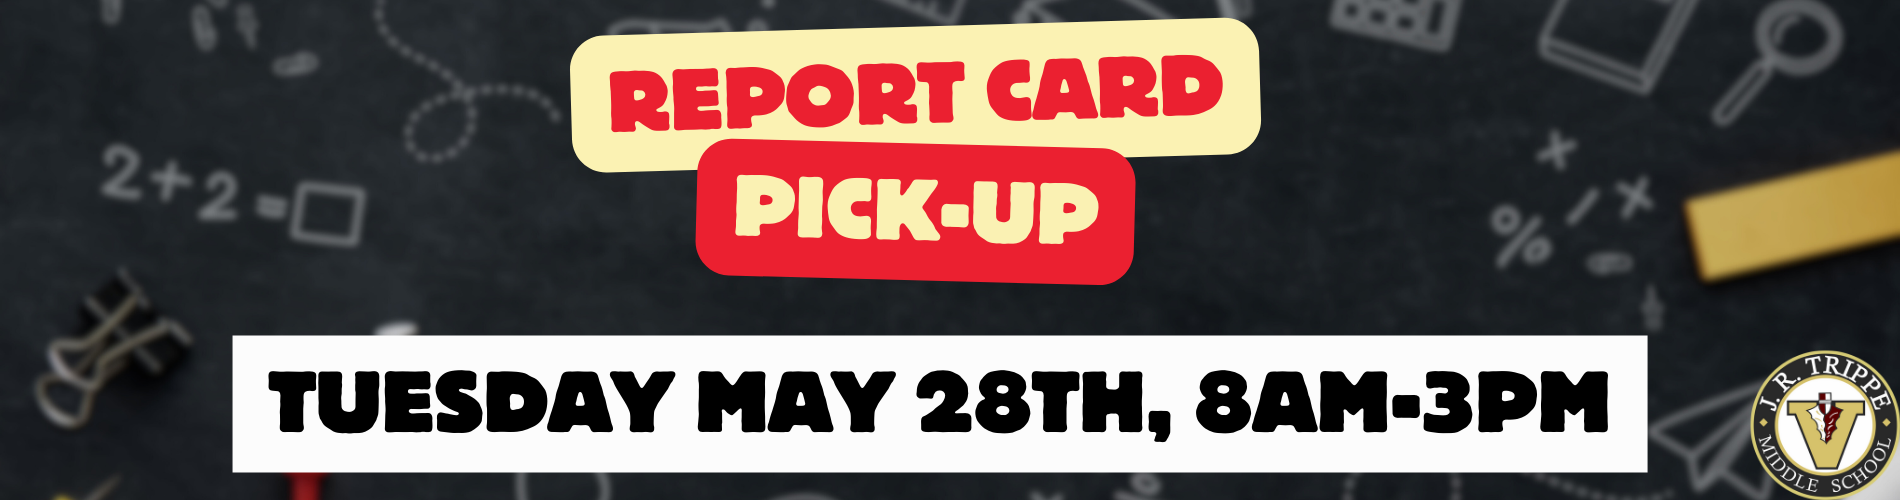 Pick up report cards may 28th 